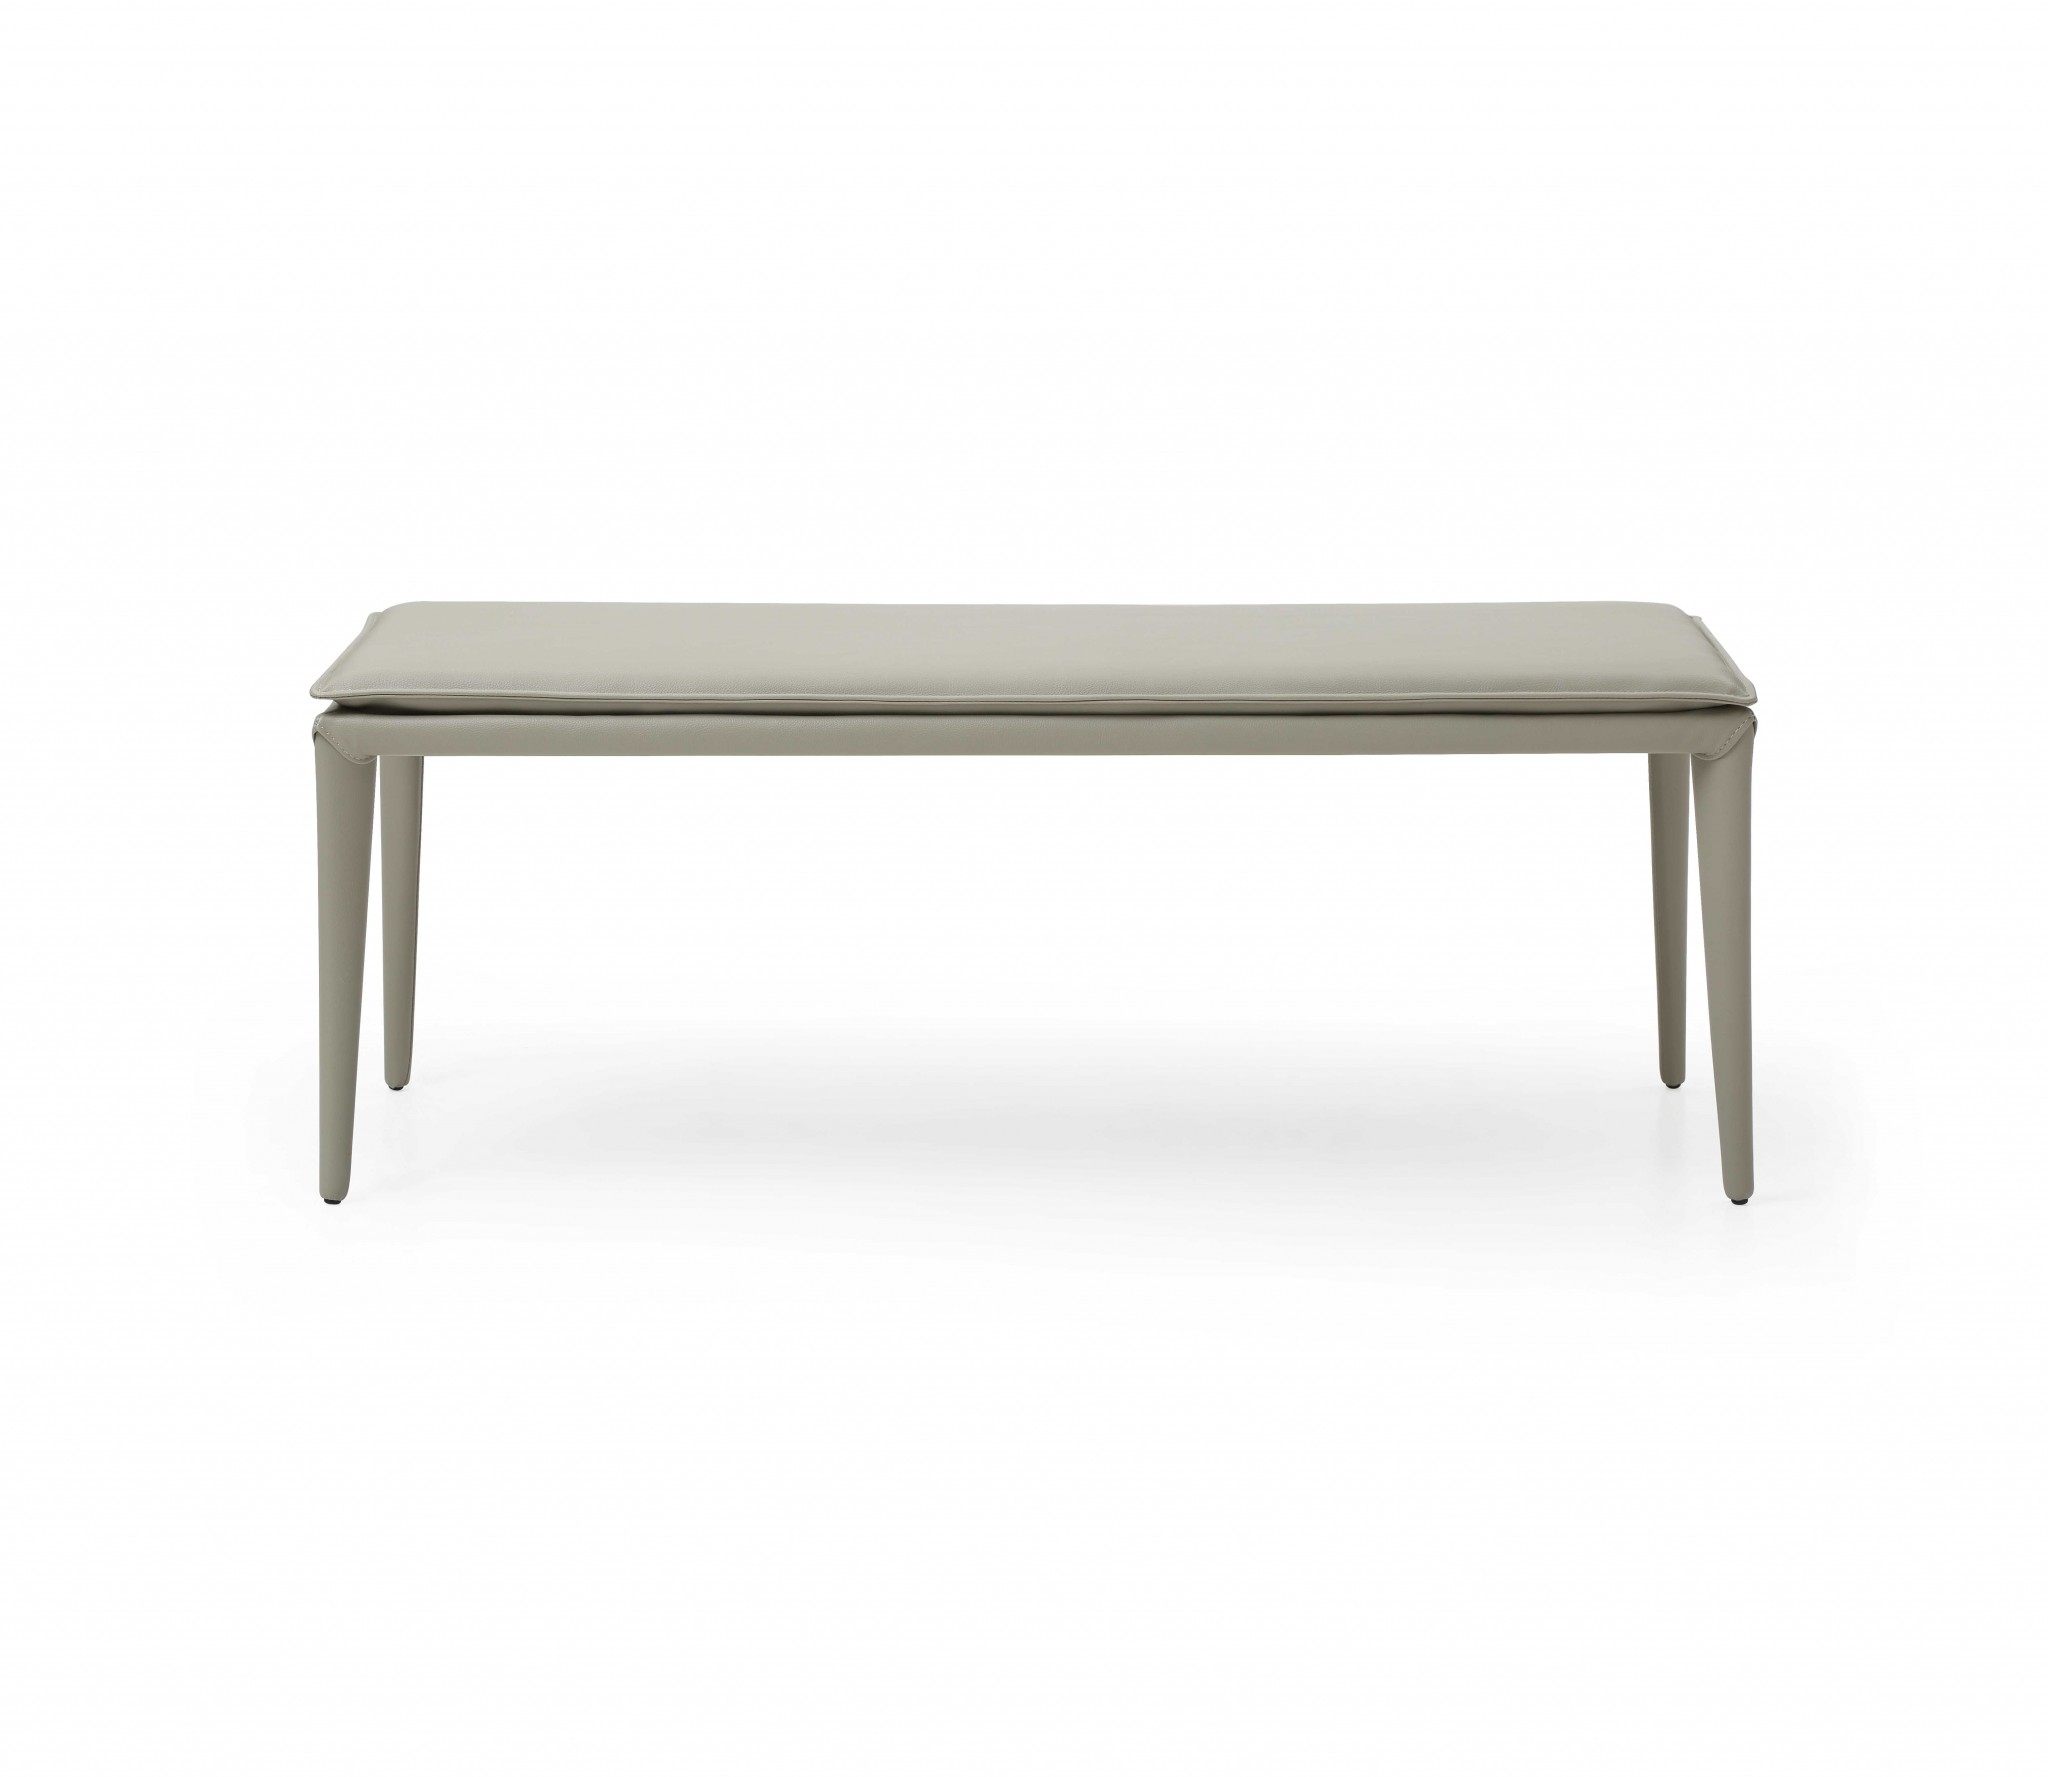 47" X 16" X 18" Light Grey Faux Leather Bench